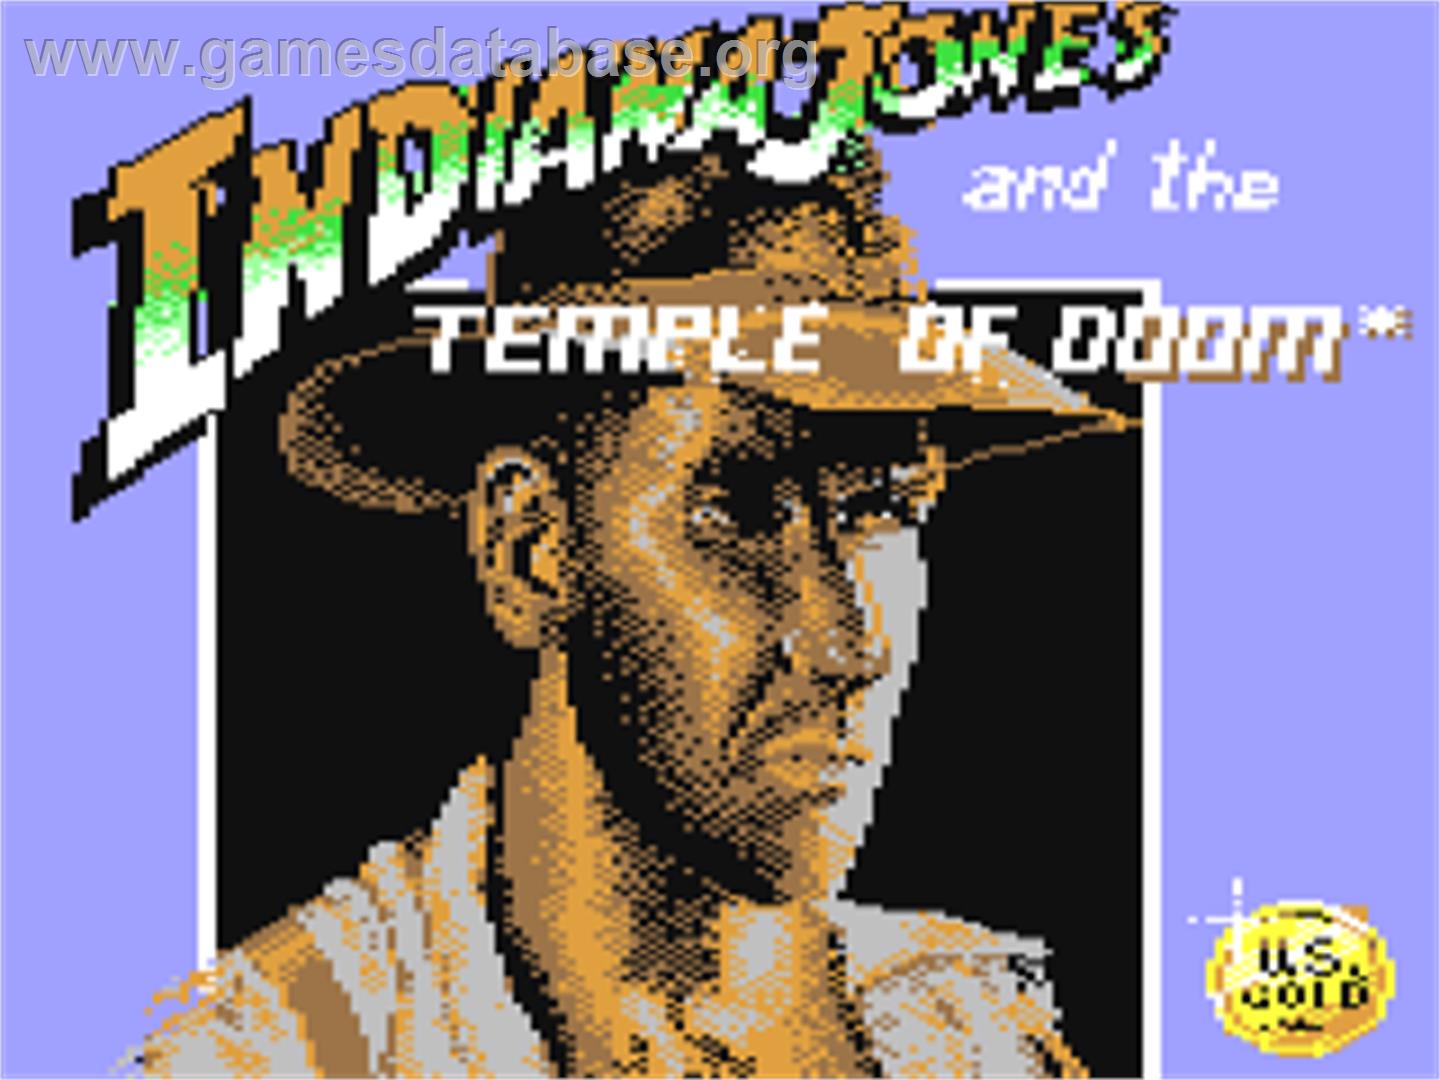 Indiana Jones and the Temple of Doom - Commodore 64 - Artwork - Title Screen